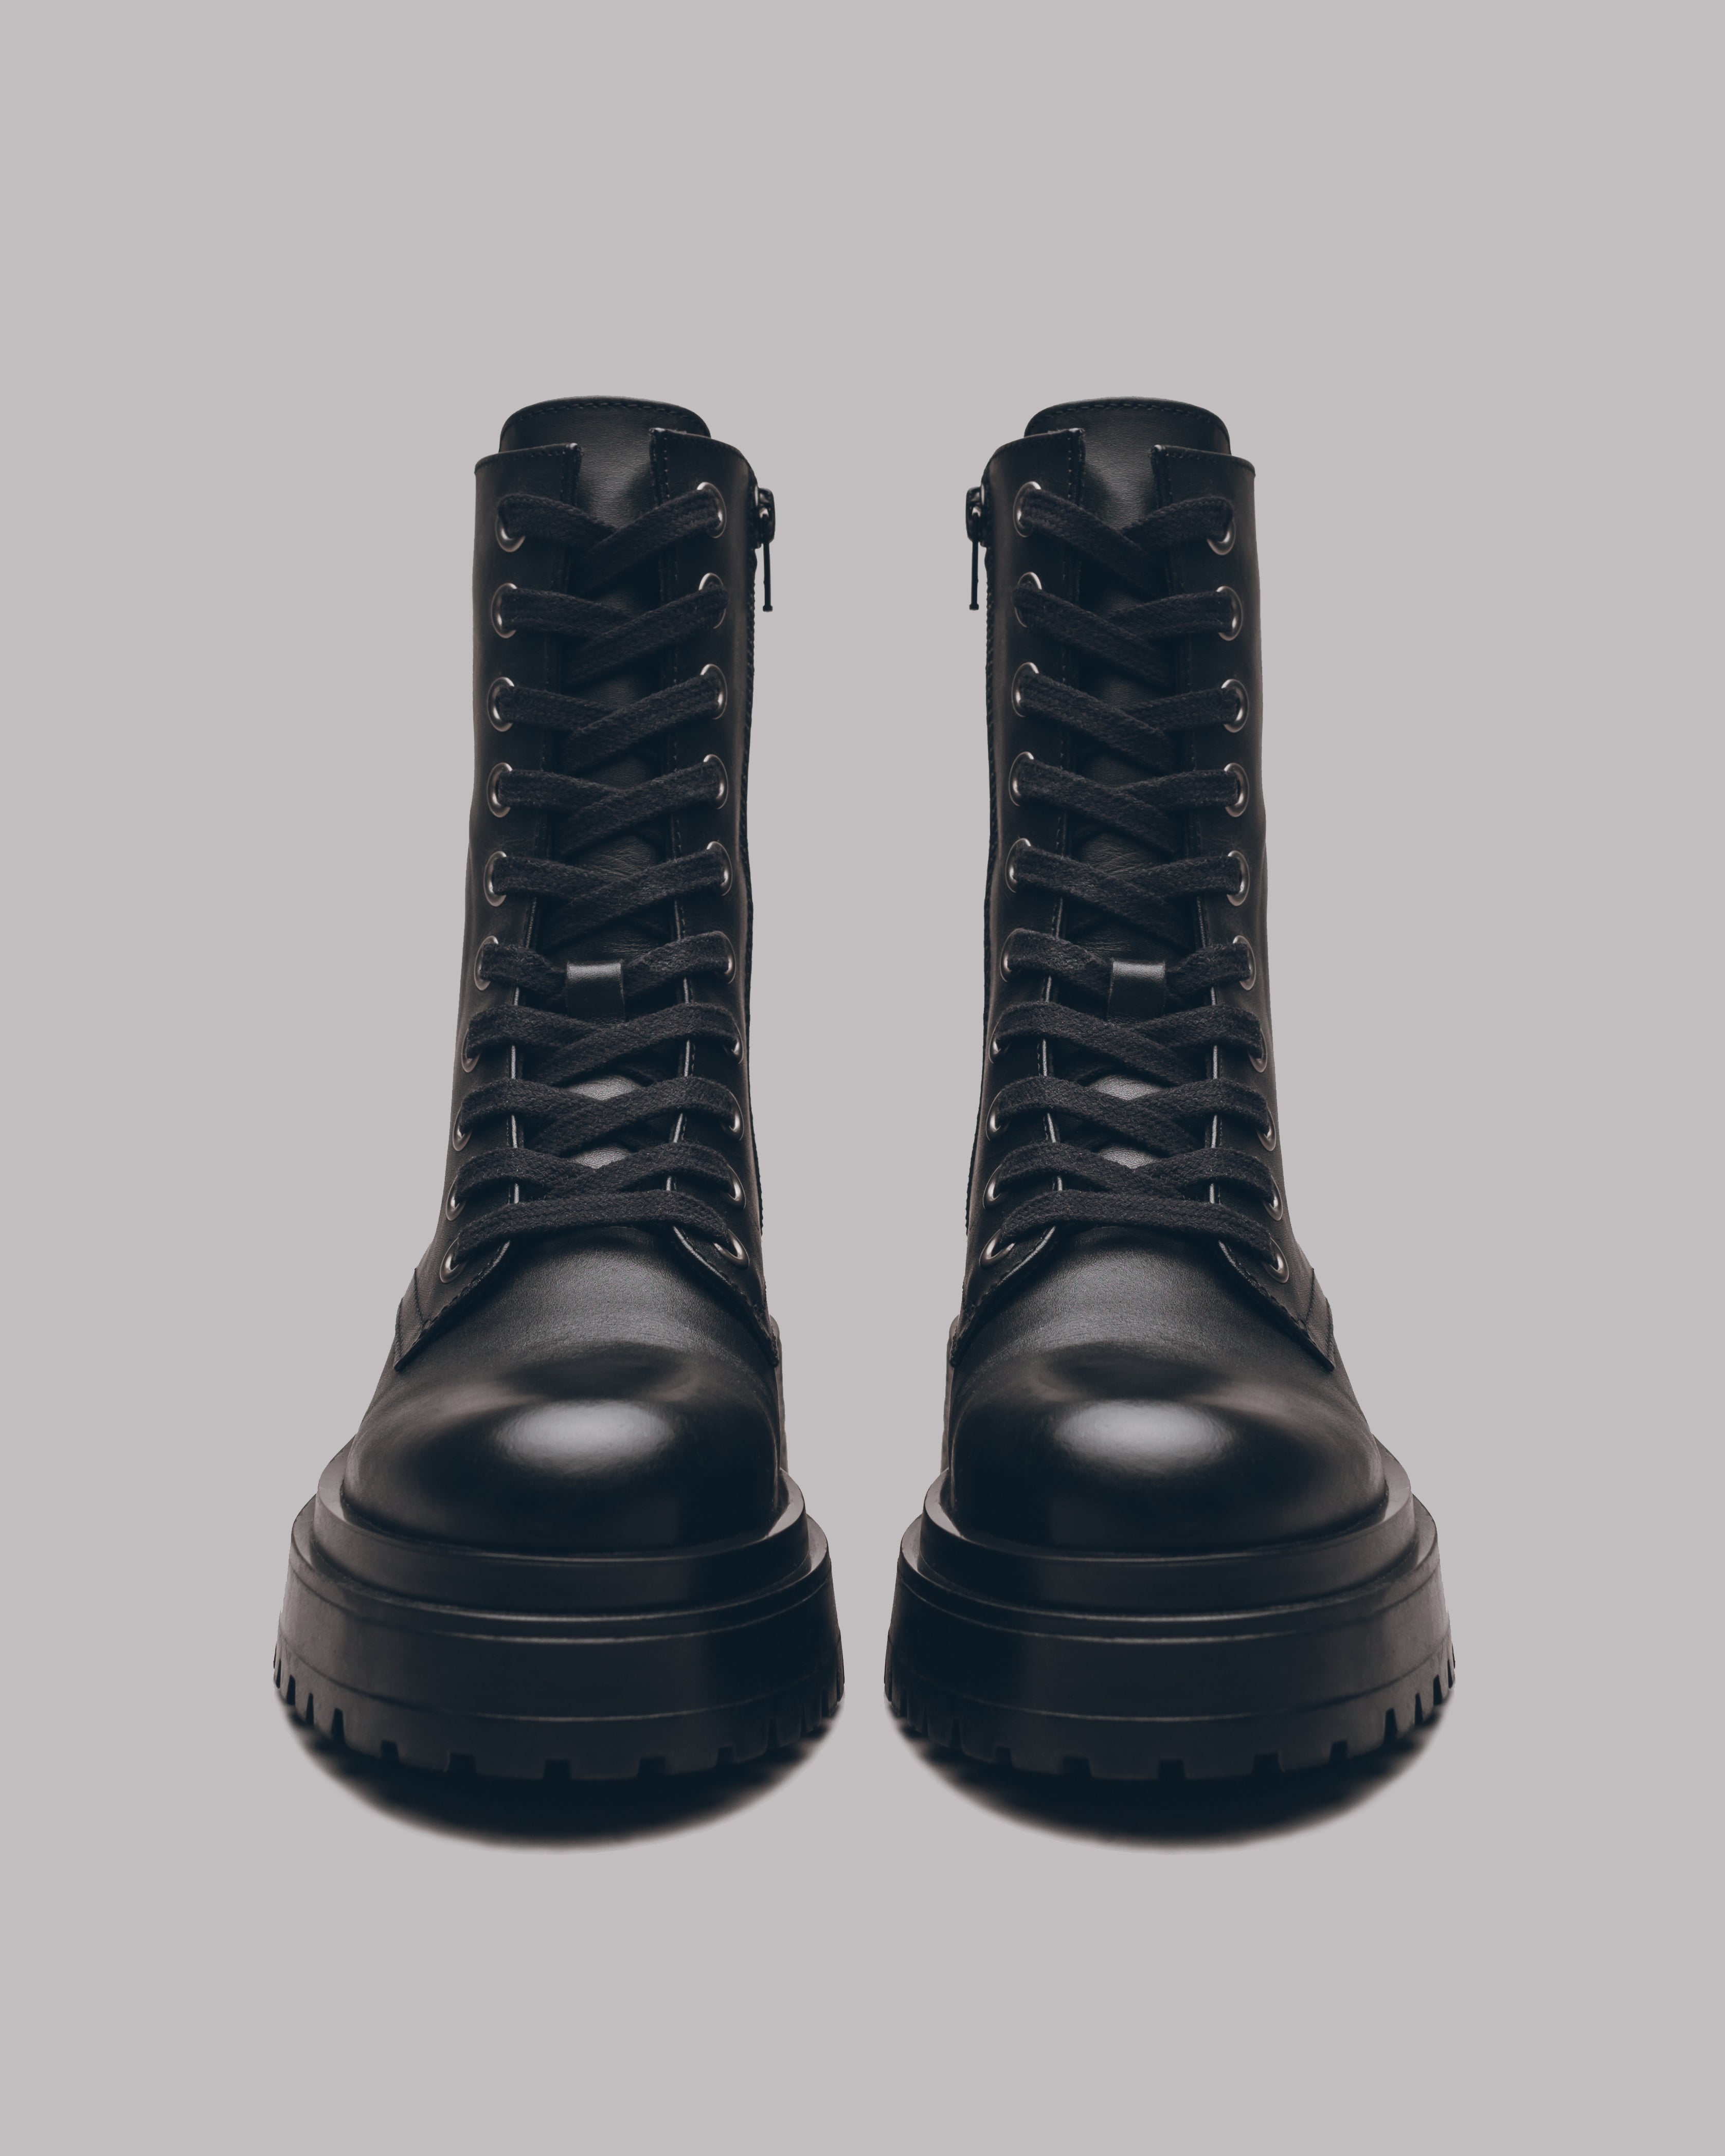 The Black Laced Leather Boots